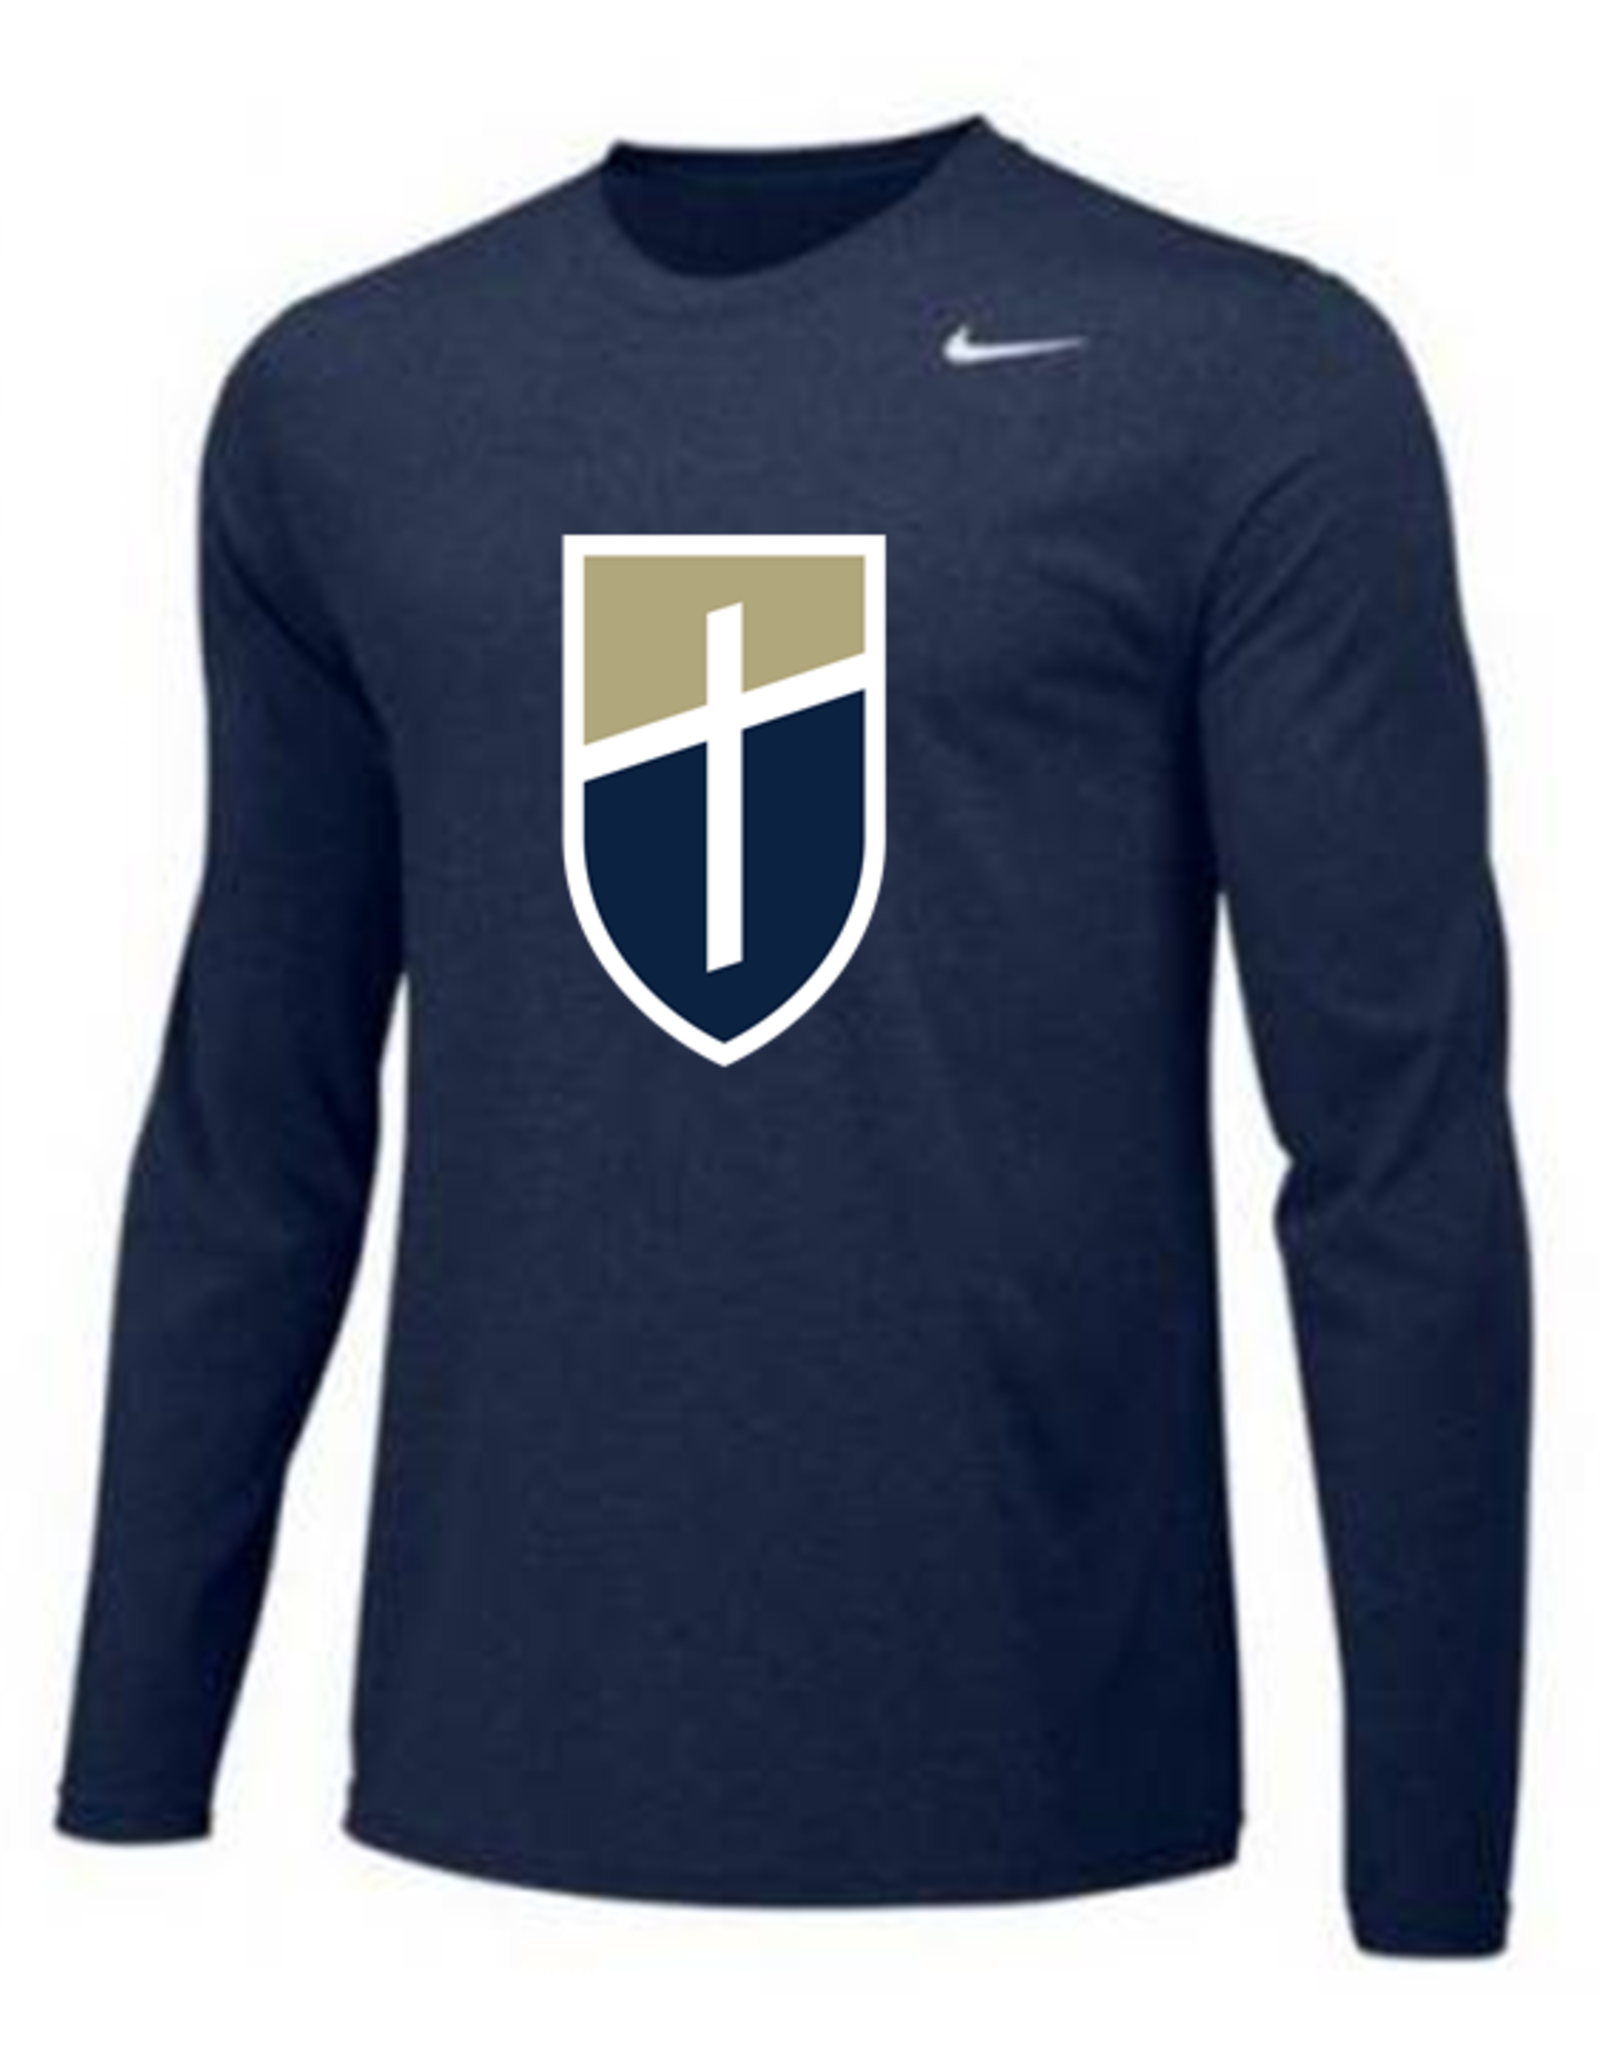 Nike Dri-Fit Long-Sleeve Navy with Shield